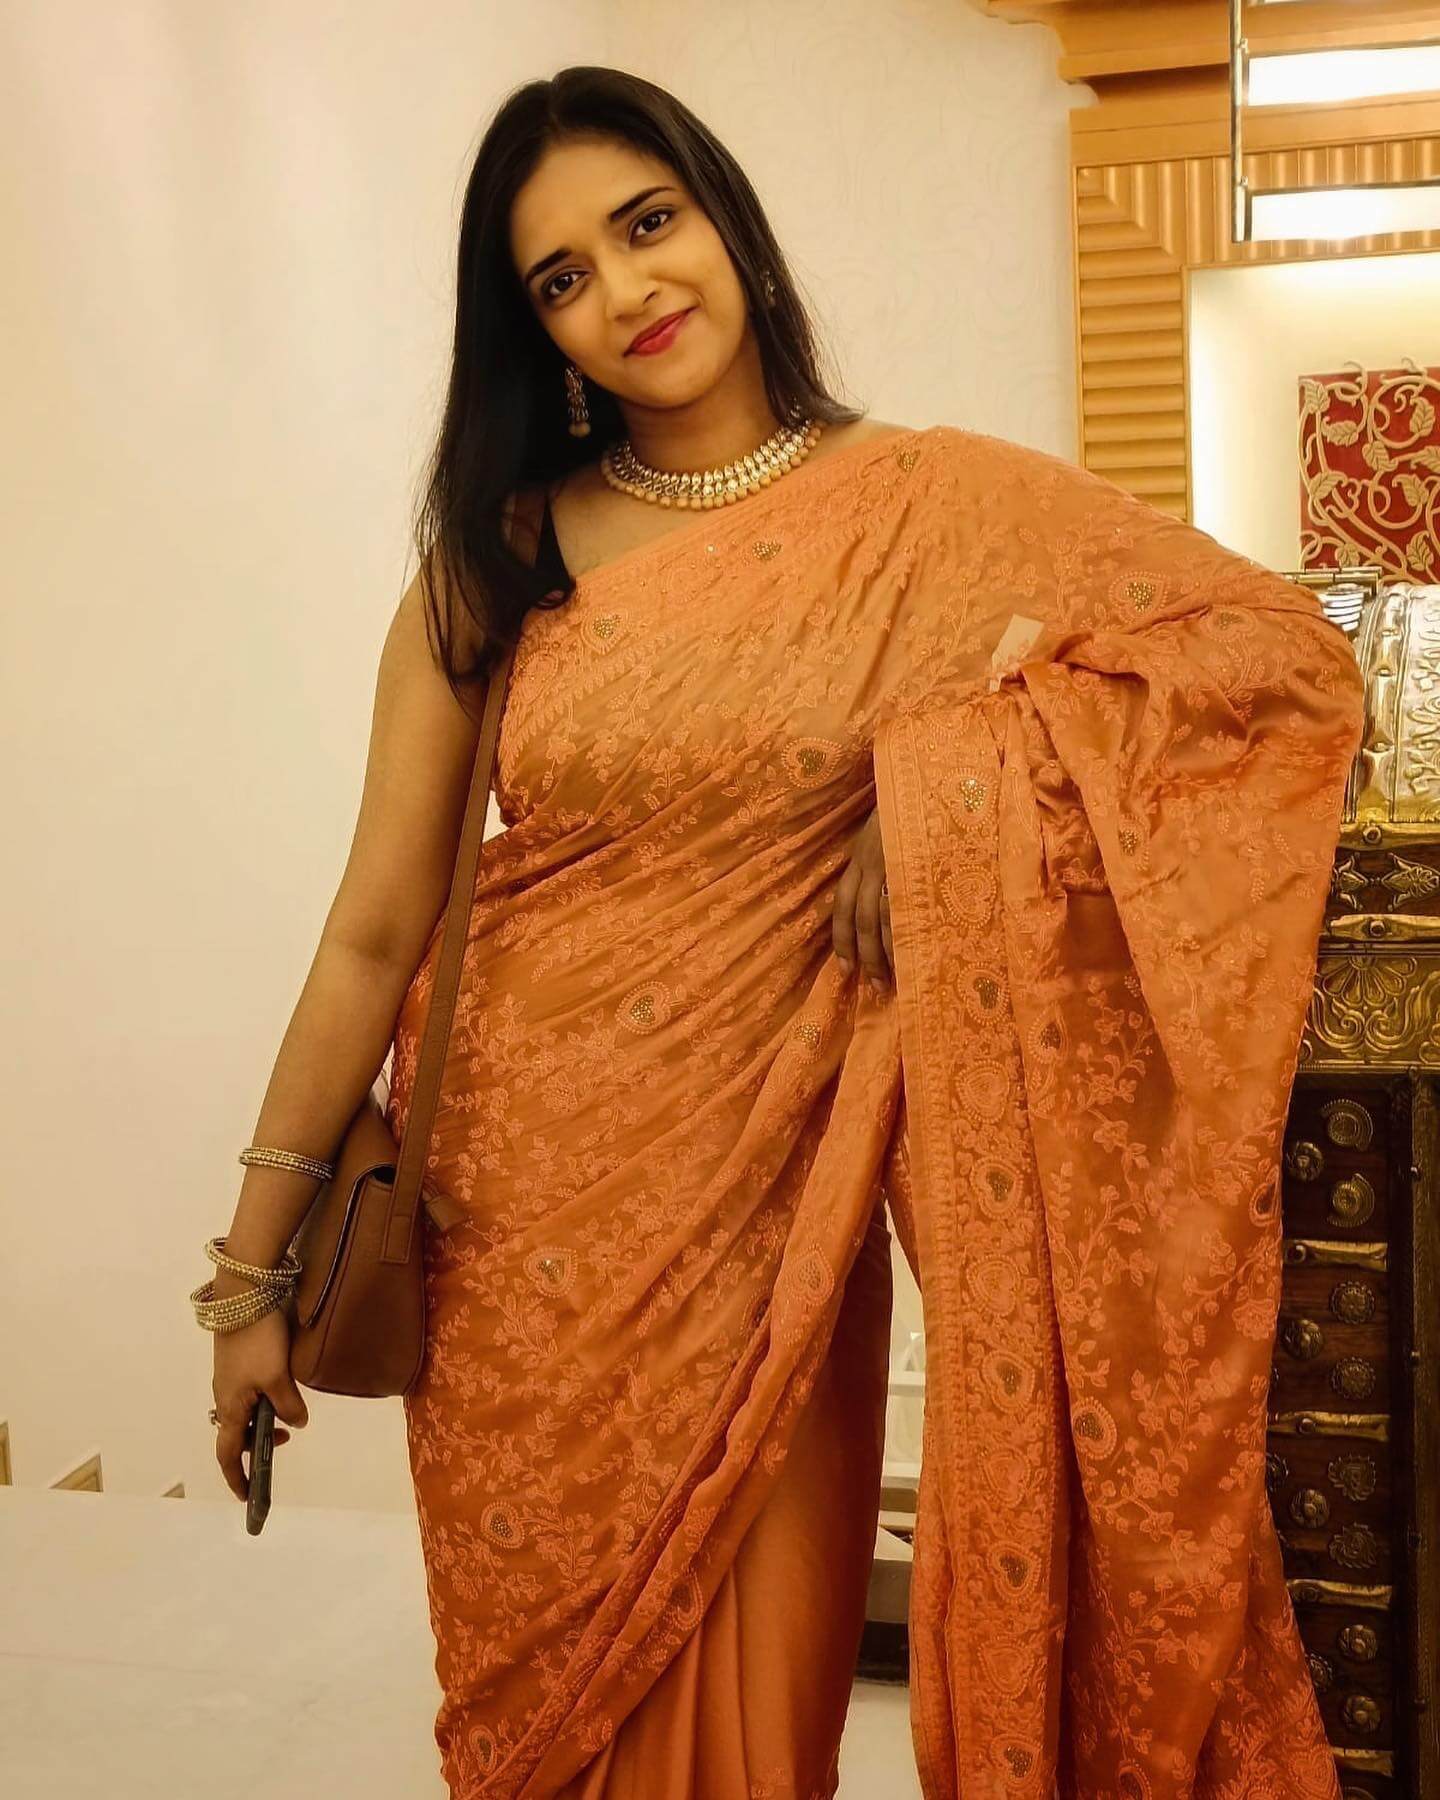 Vasundhara Kashyap In Orange Embroidered Saree With Straight Hairs Gives Us Festive Vibes